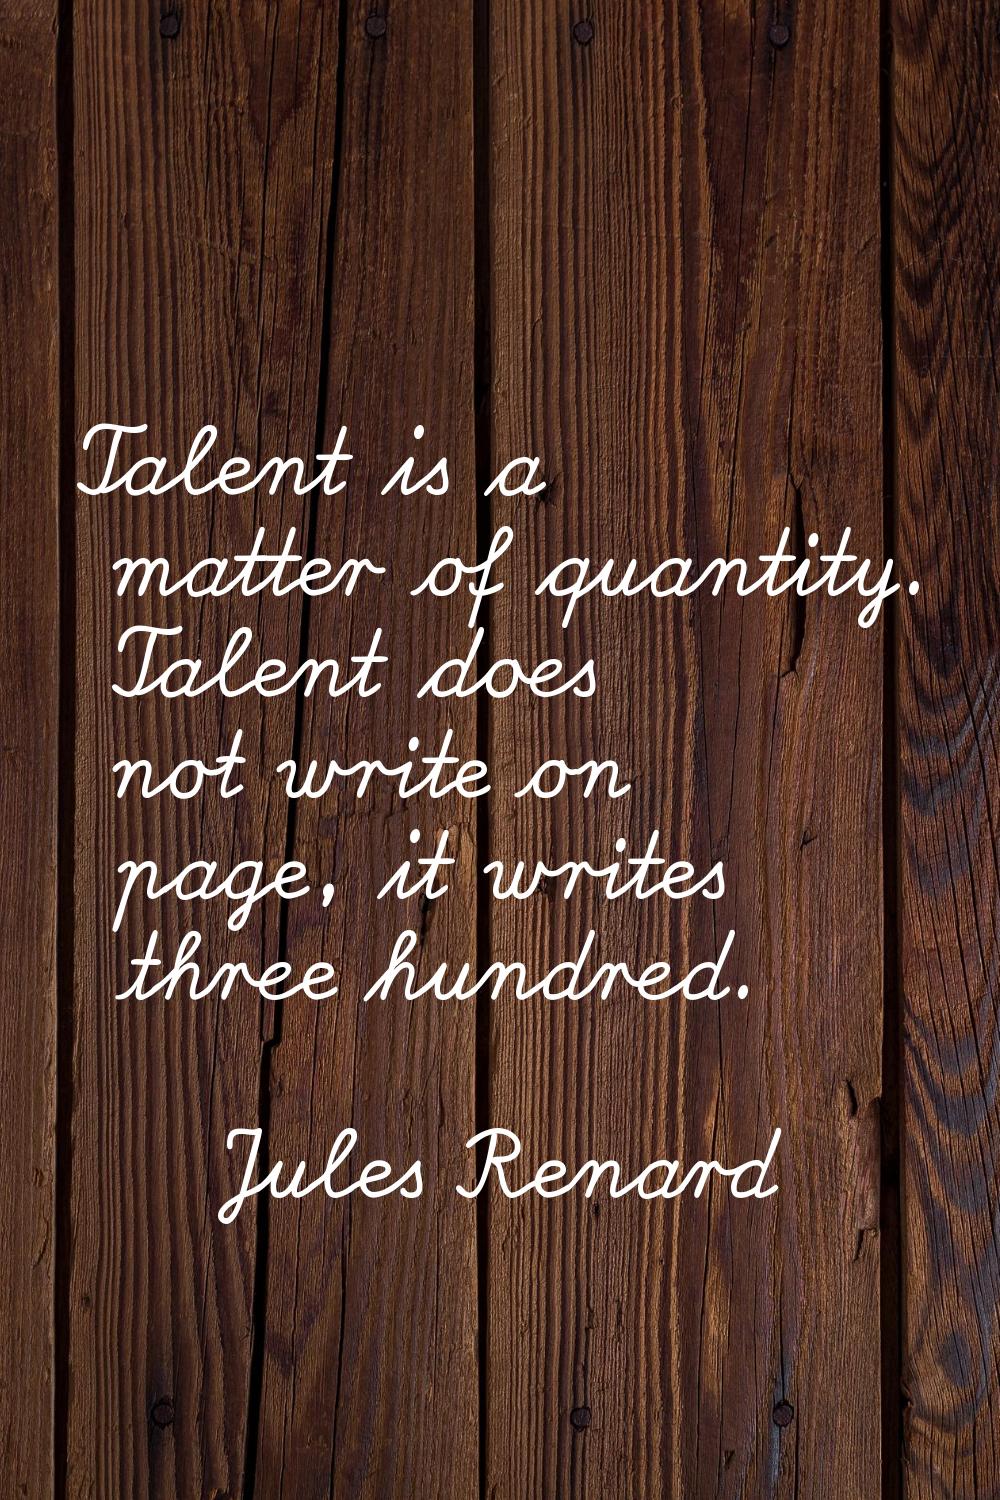 Talent is a matter of quantity. Talent does not write on page, it writes three hundred.